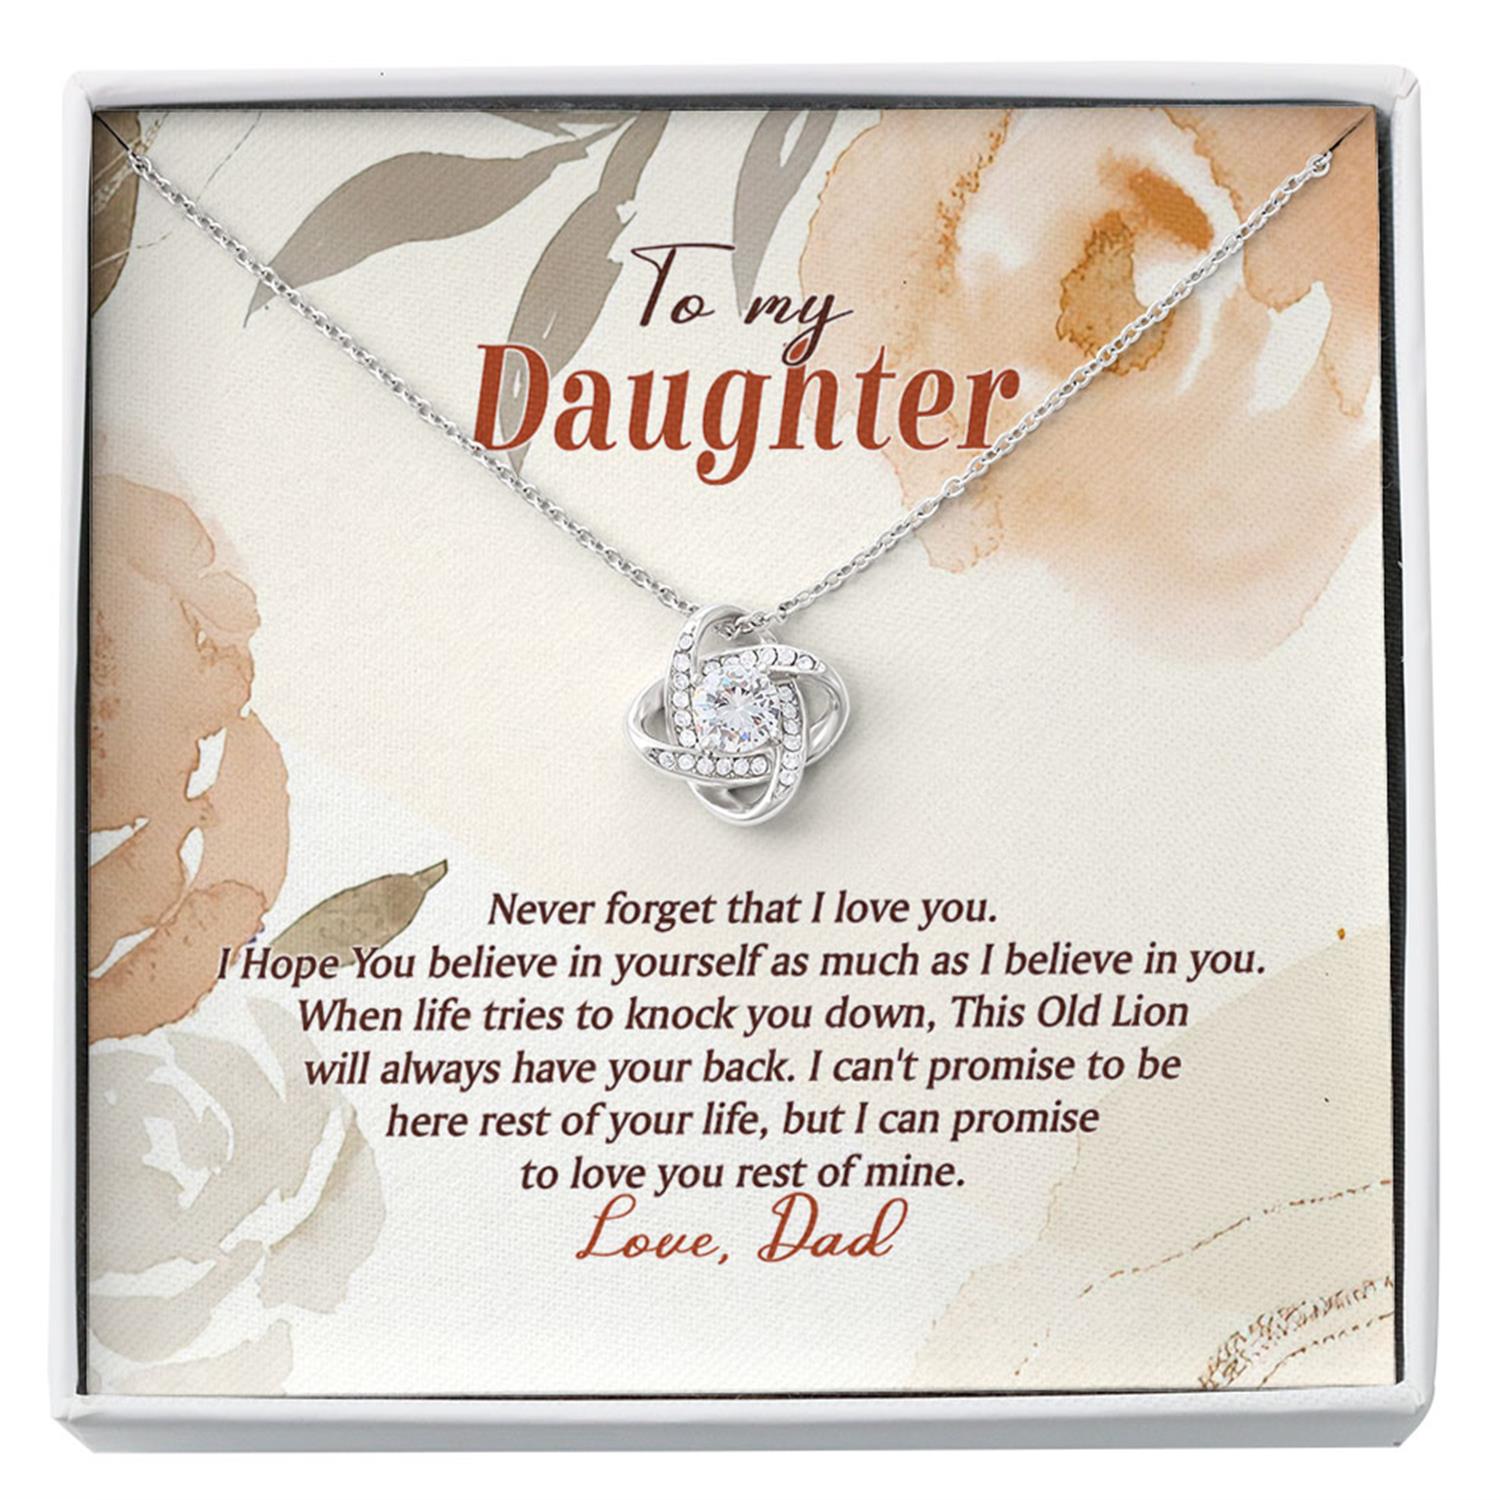 Daughter Necklace, To My Daughter Necklace, This Old Lion Will Always Have Your Back, Love Dad Custom Necklace